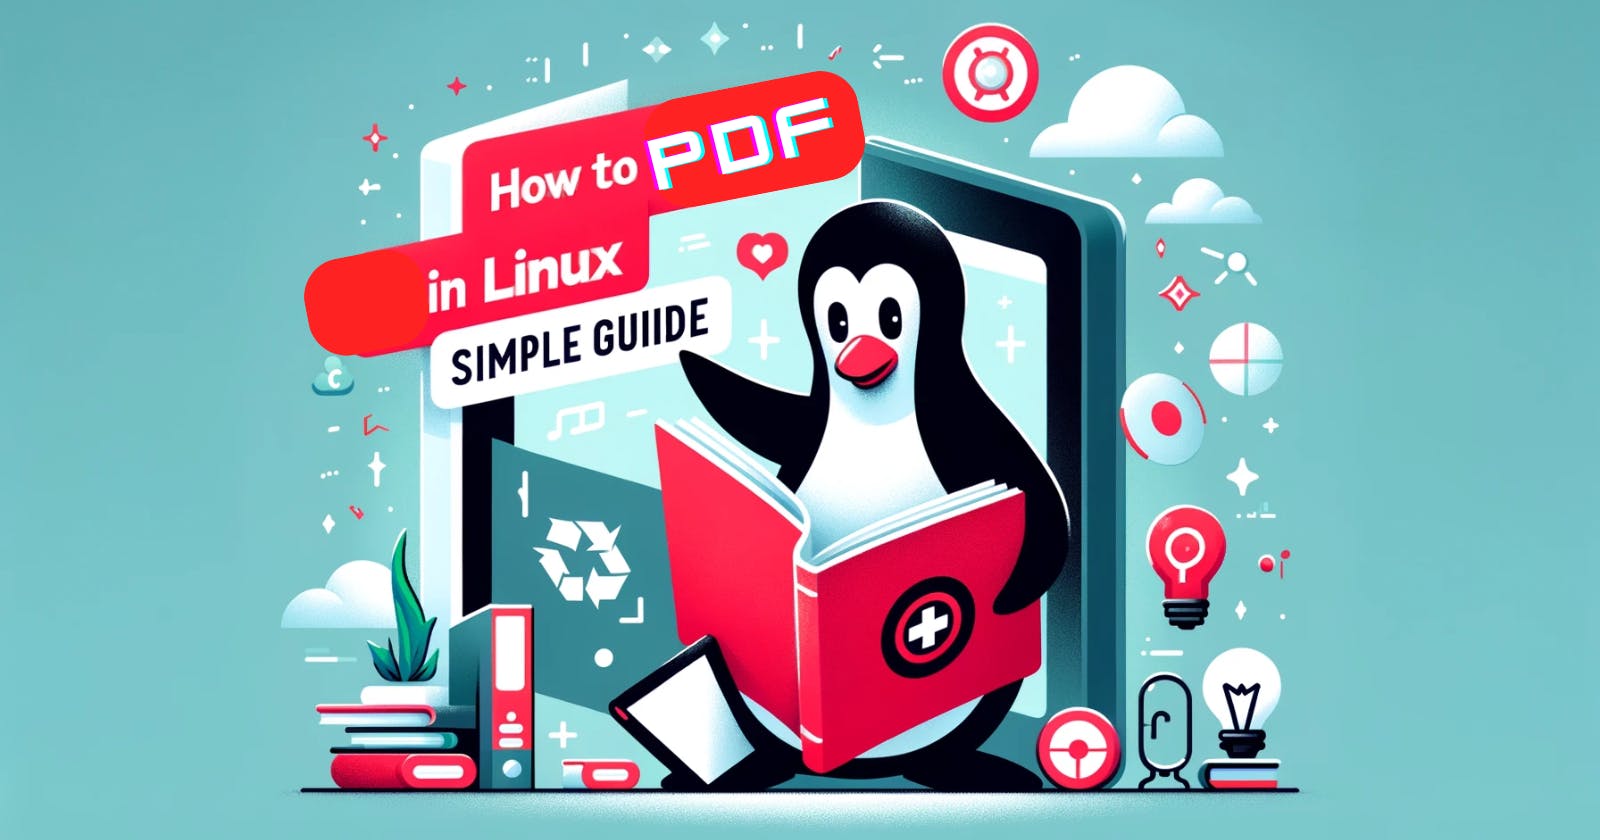 How to Open PDFs in Linux: Simple Guide